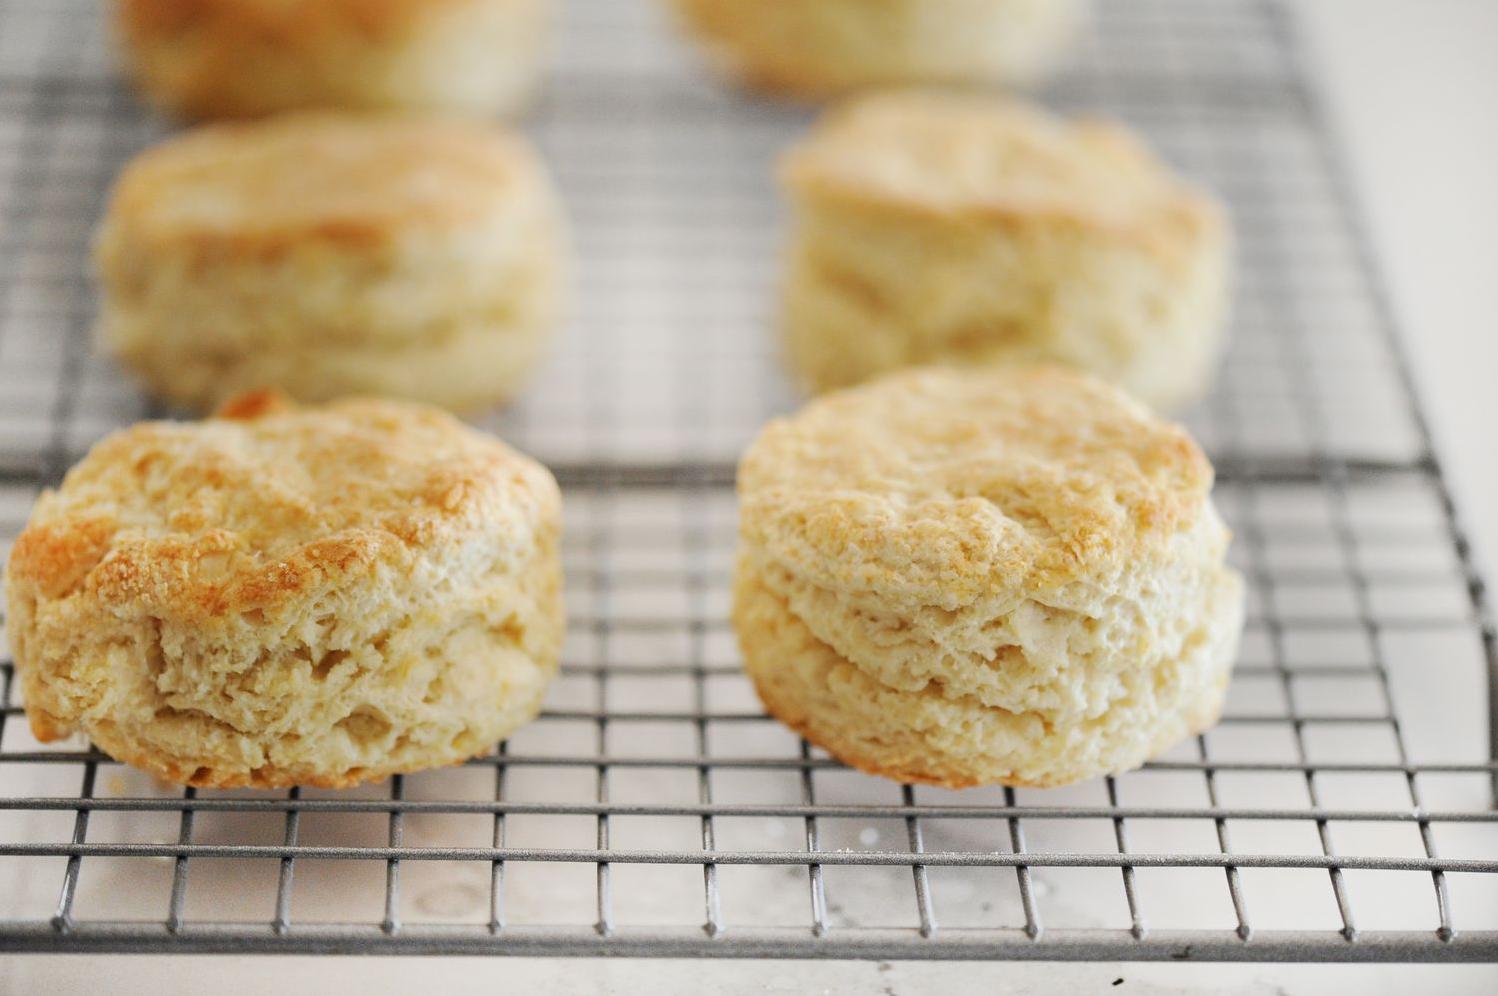  The buttery goodness of these scones is sure to make them a crowd-pleaser at any gathering.